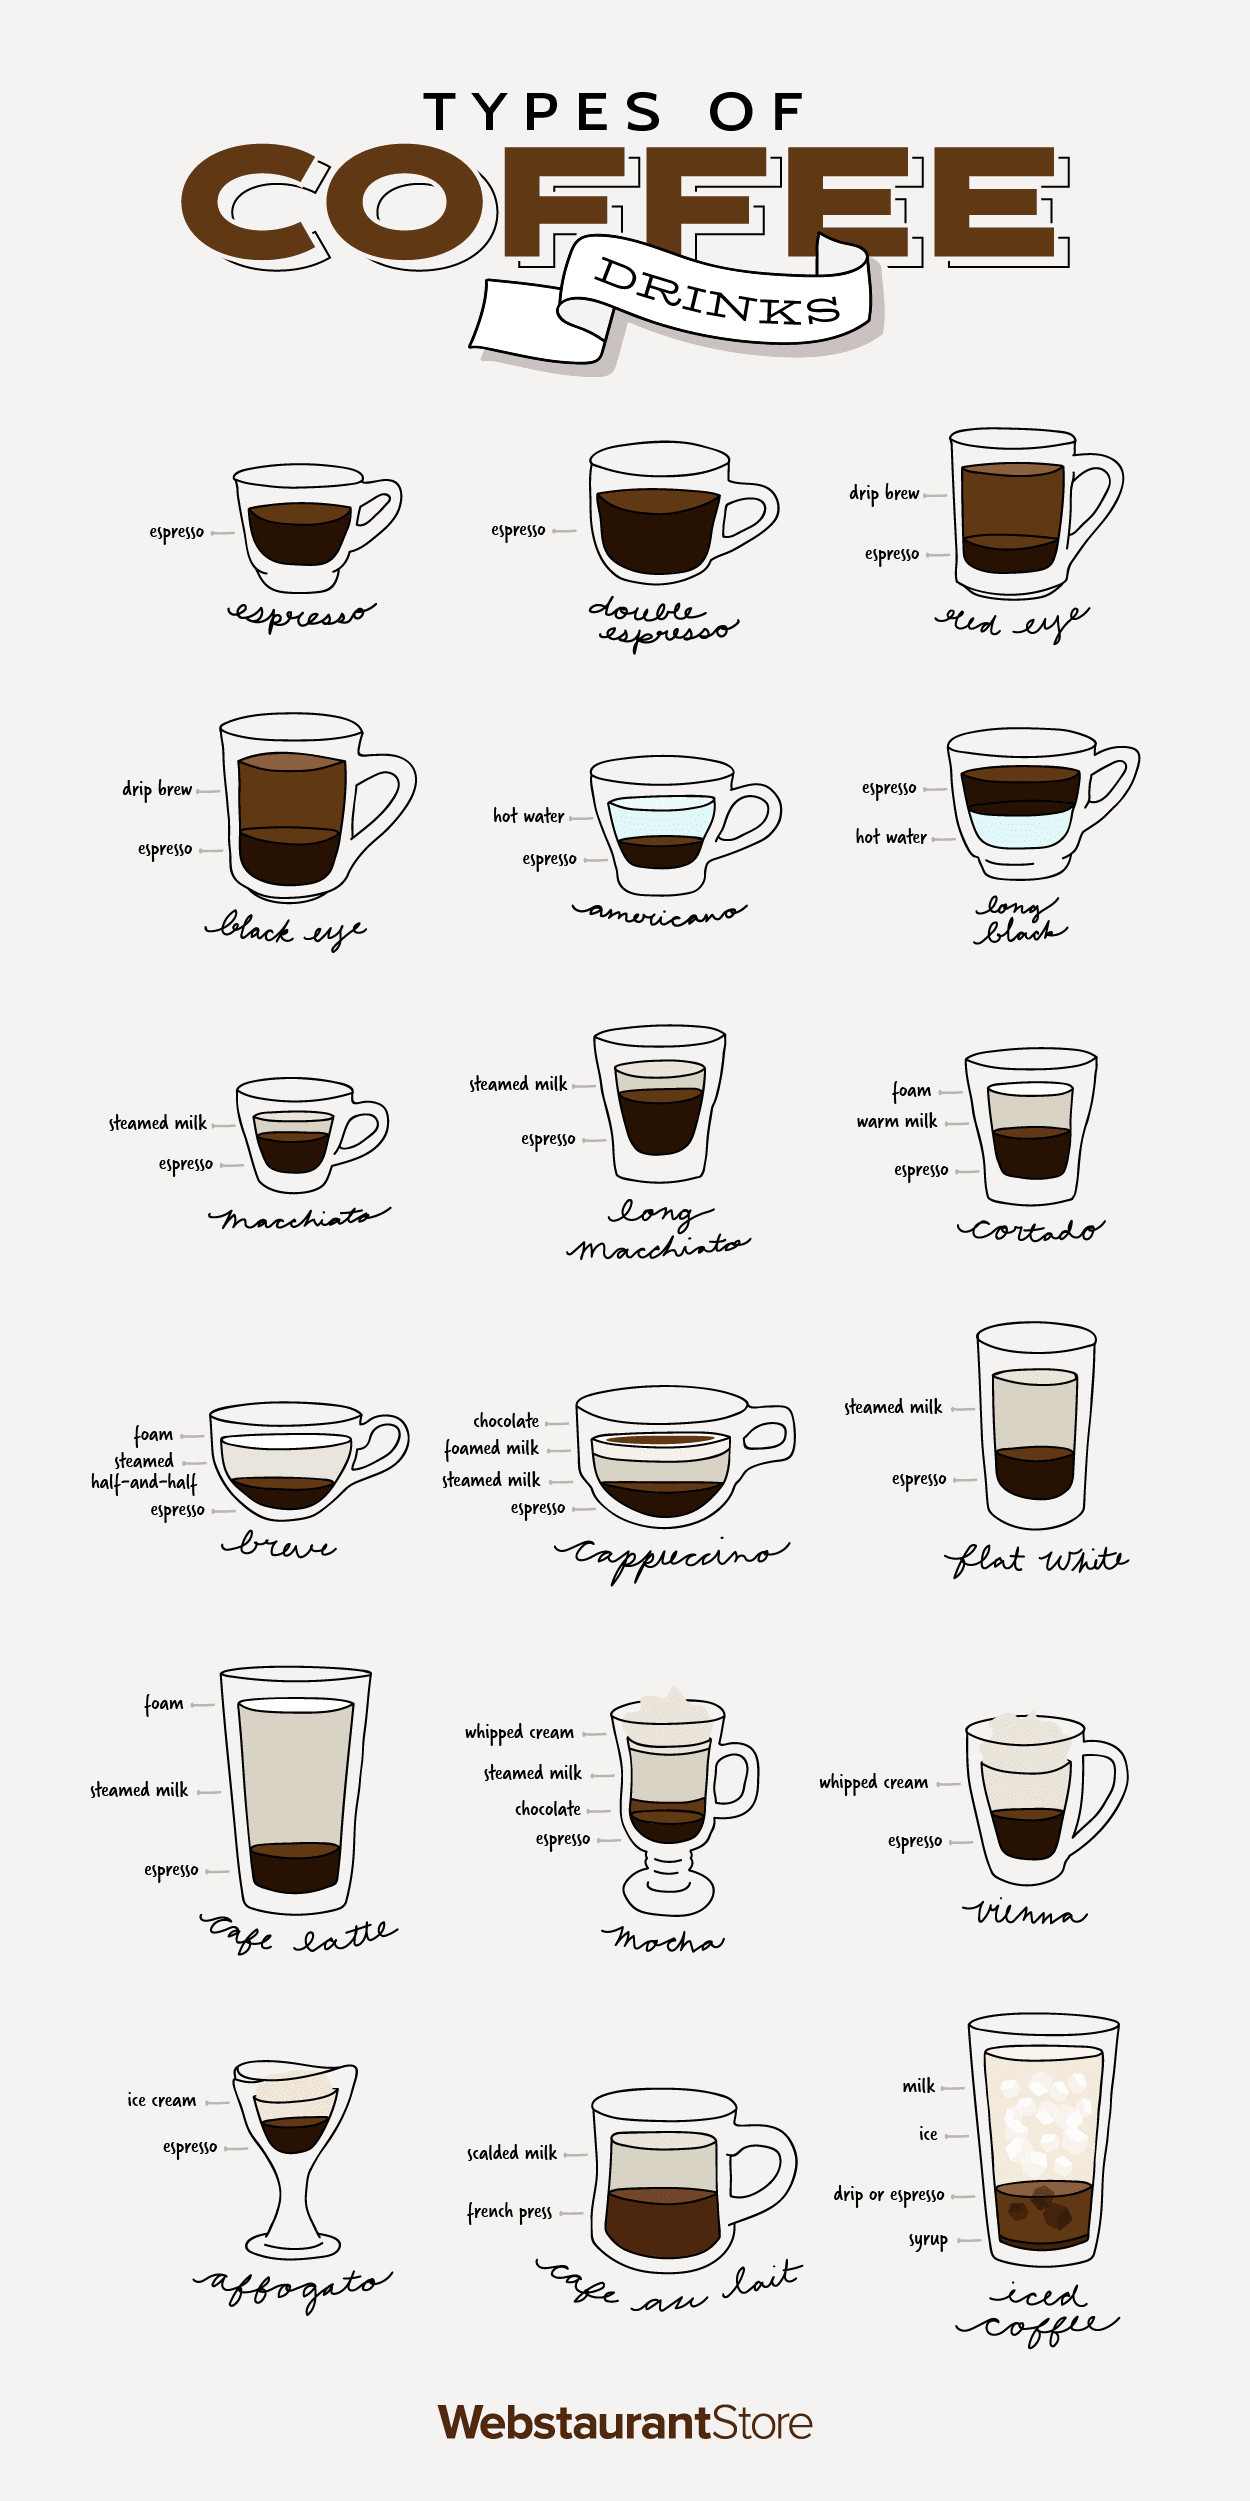 Types Of Coffee Drinks
 The 18 Different Types of Coffee Drinks Explained